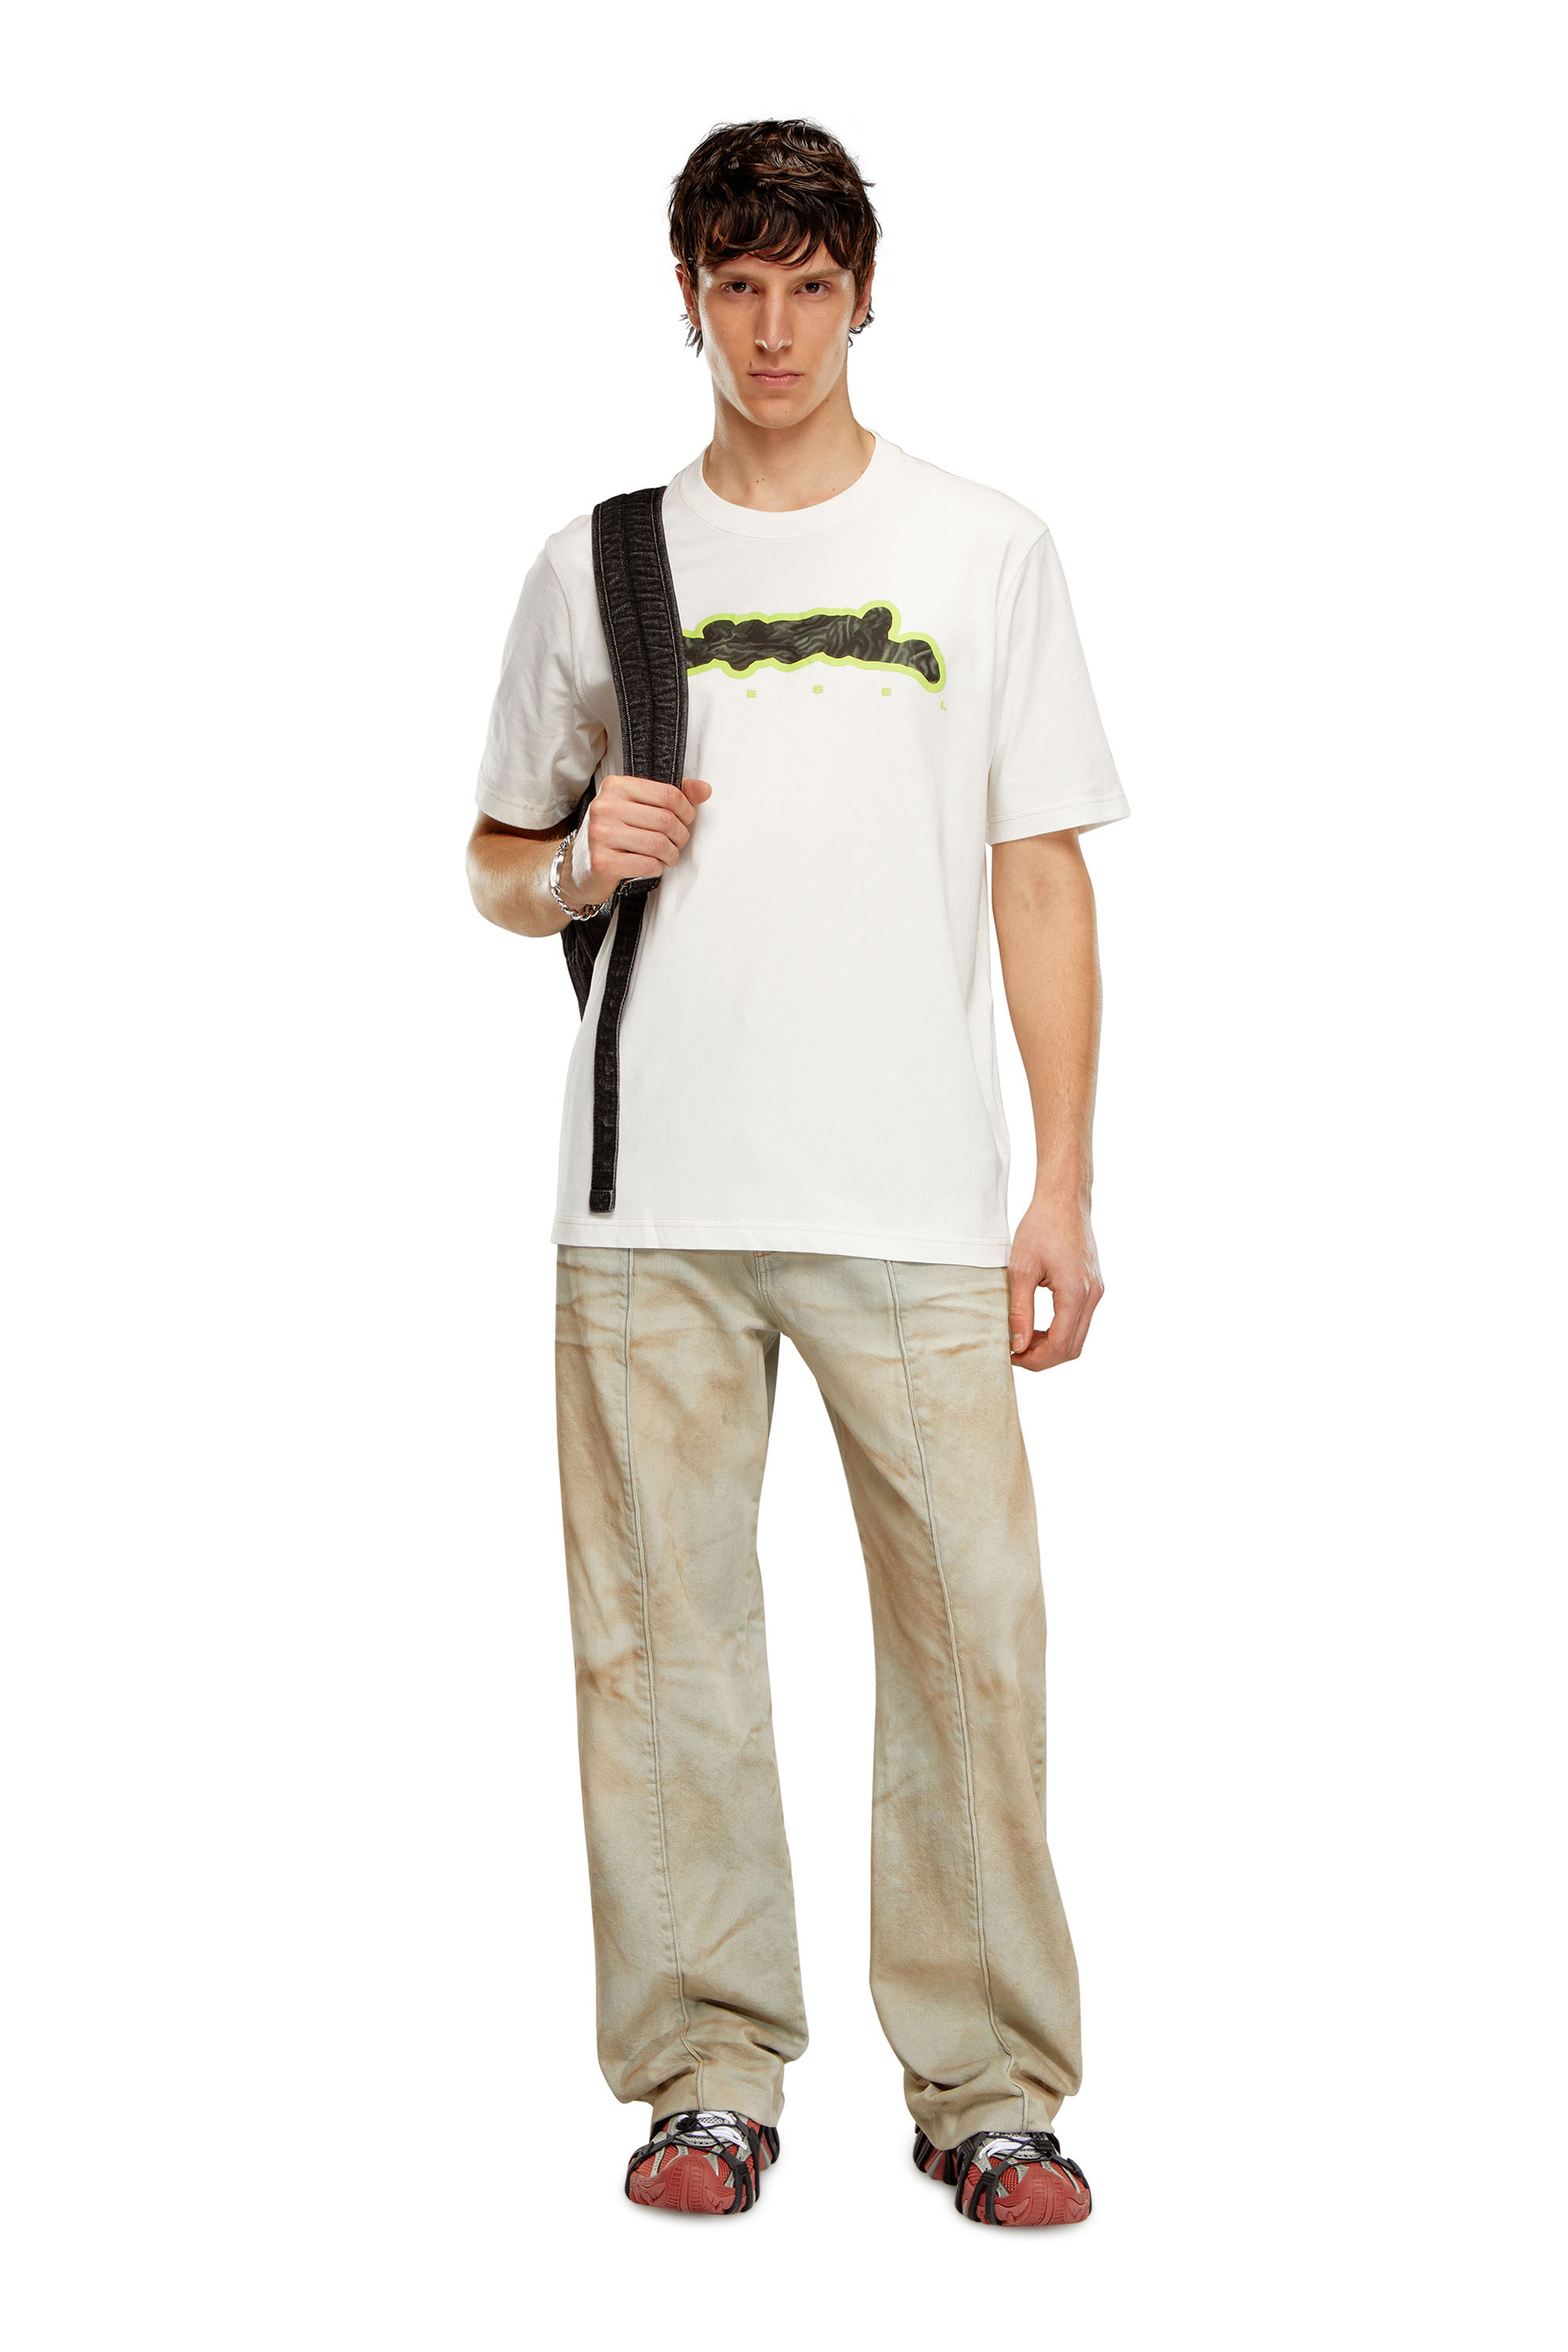 Diesel - T-JUST-N16, Man T-shirt with zebra-camo motif in White - Image 2